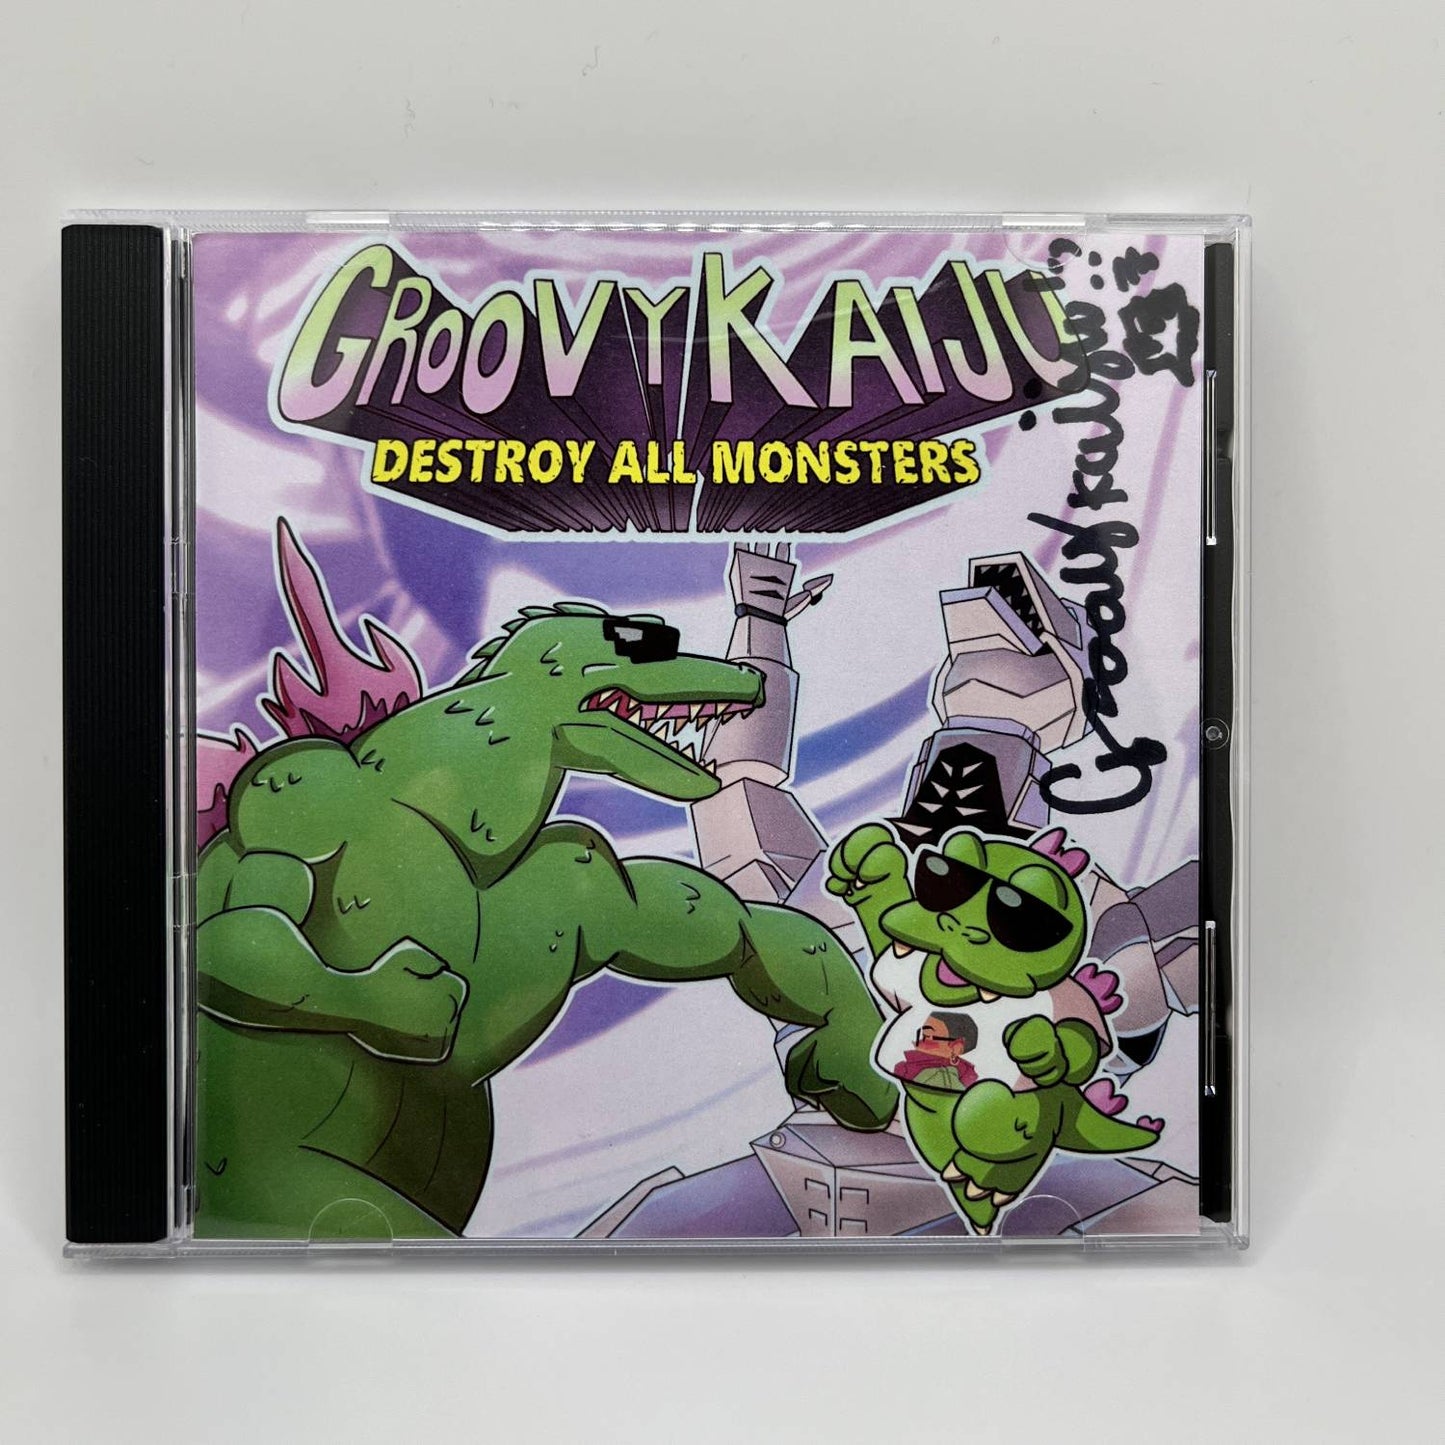 Bundles, Early Access, & Other Groovy Kaiju Goodies